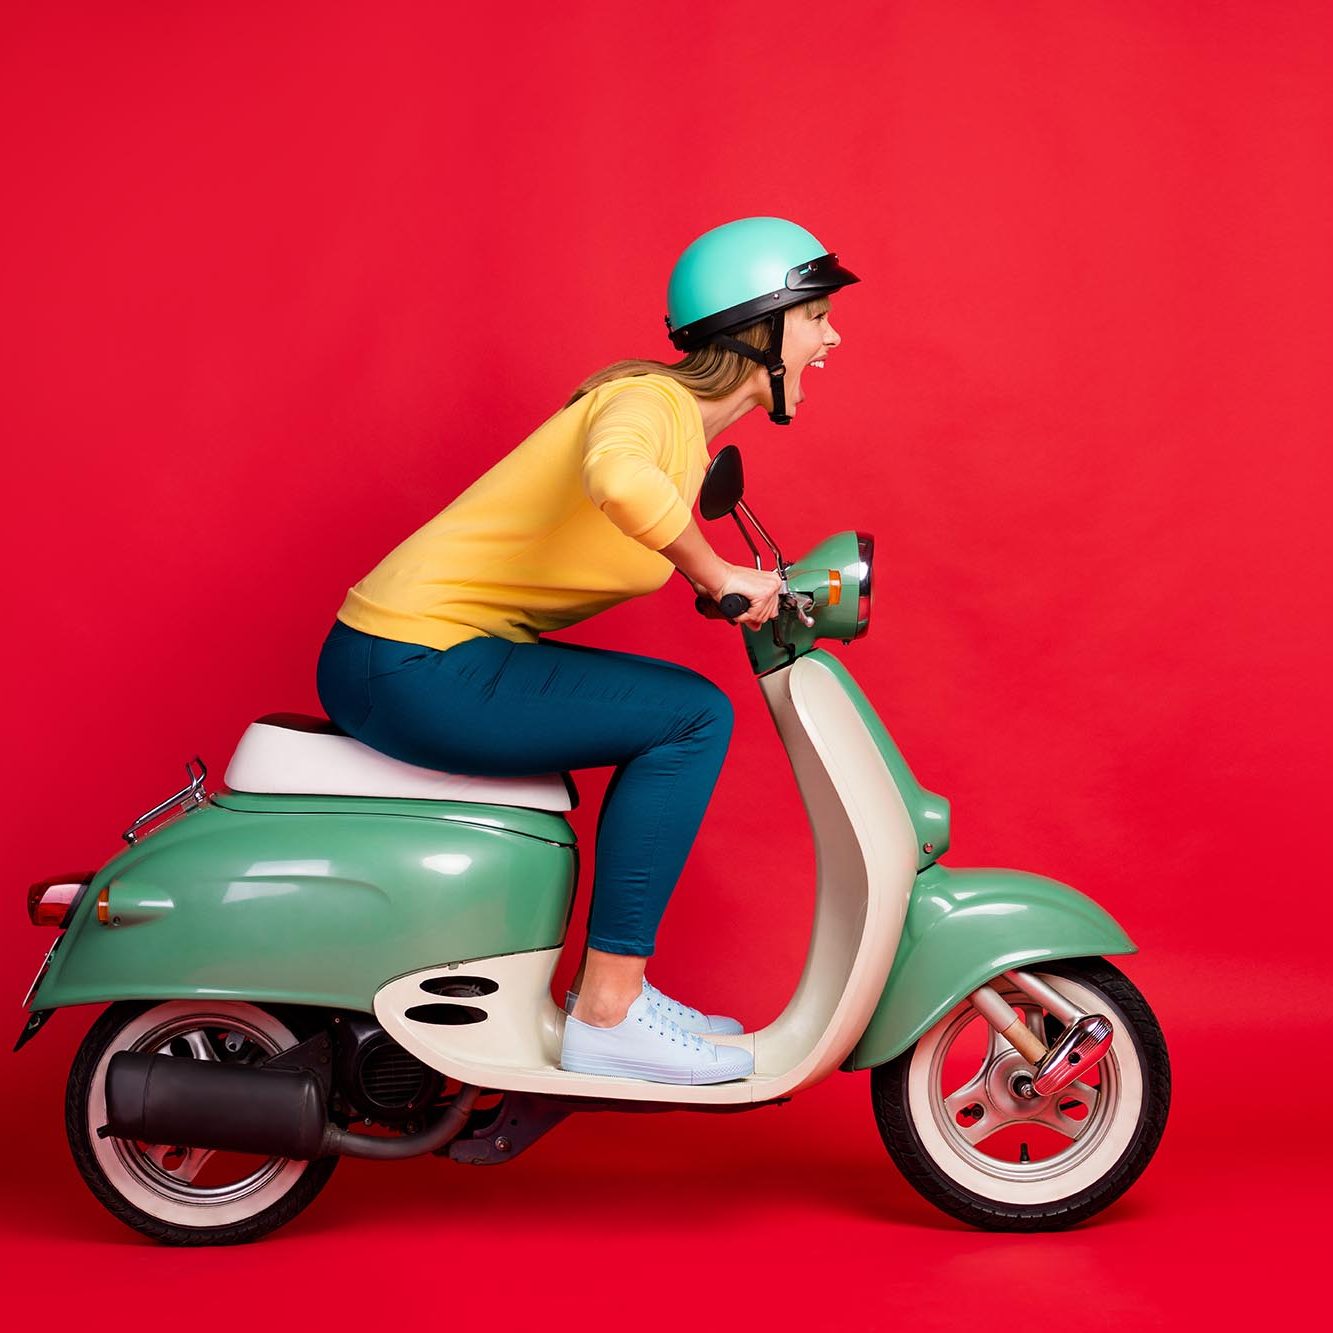 Profile side view portrait of her she nice attractive lovely crazy girlish, cheerful cheery girl riding moped having fun adventure isolated on bright vivid shine vibrant red color background